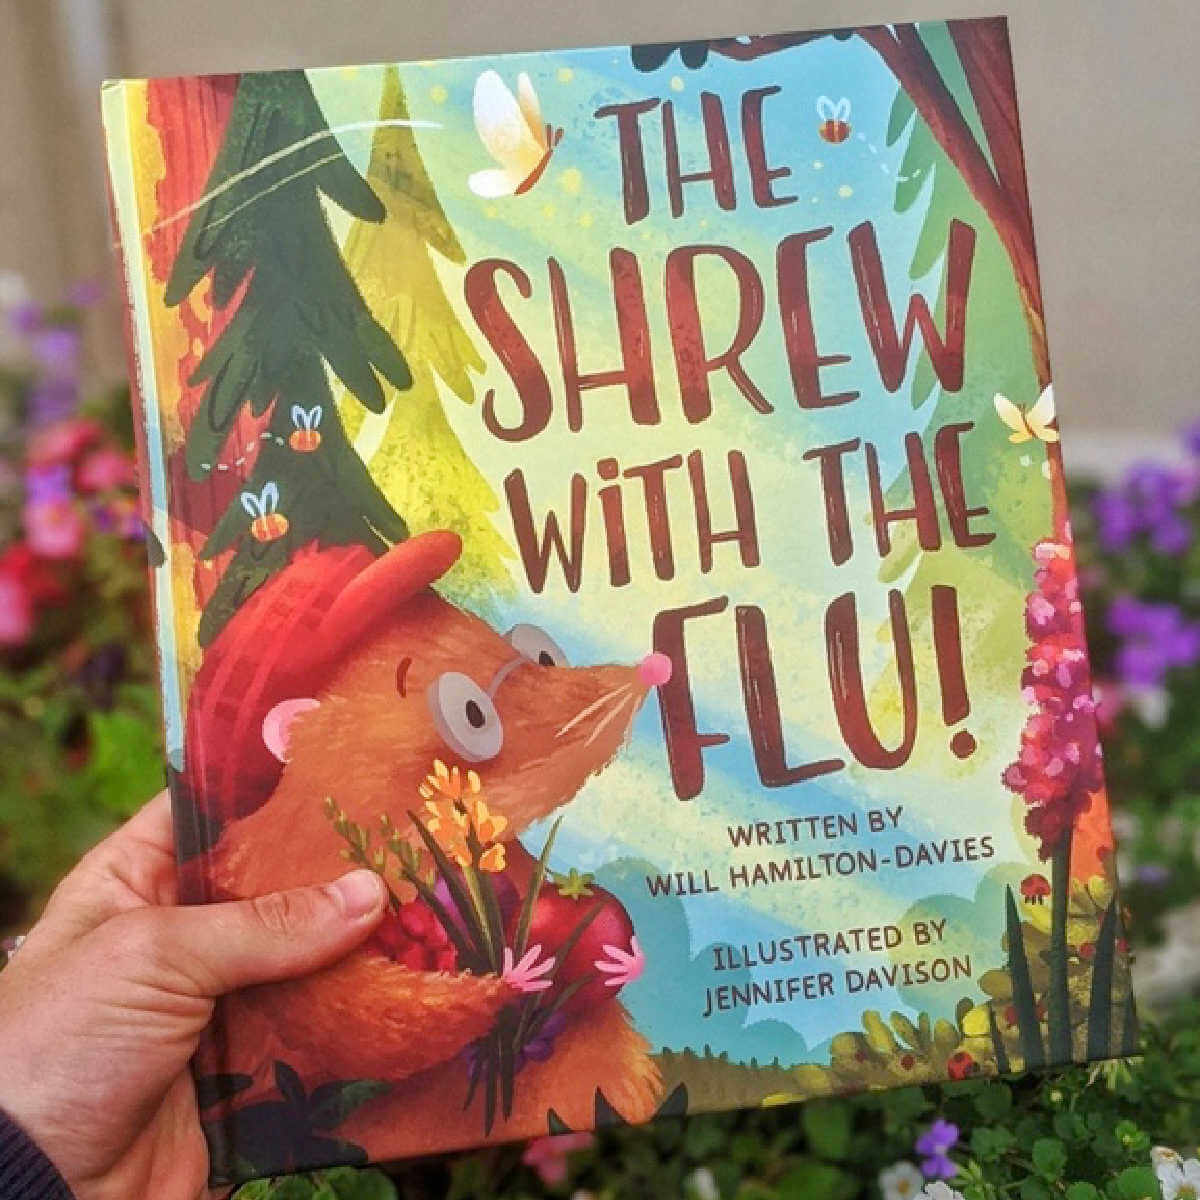 Kabloom the shrew with the flu  book and seedbom children's gift set